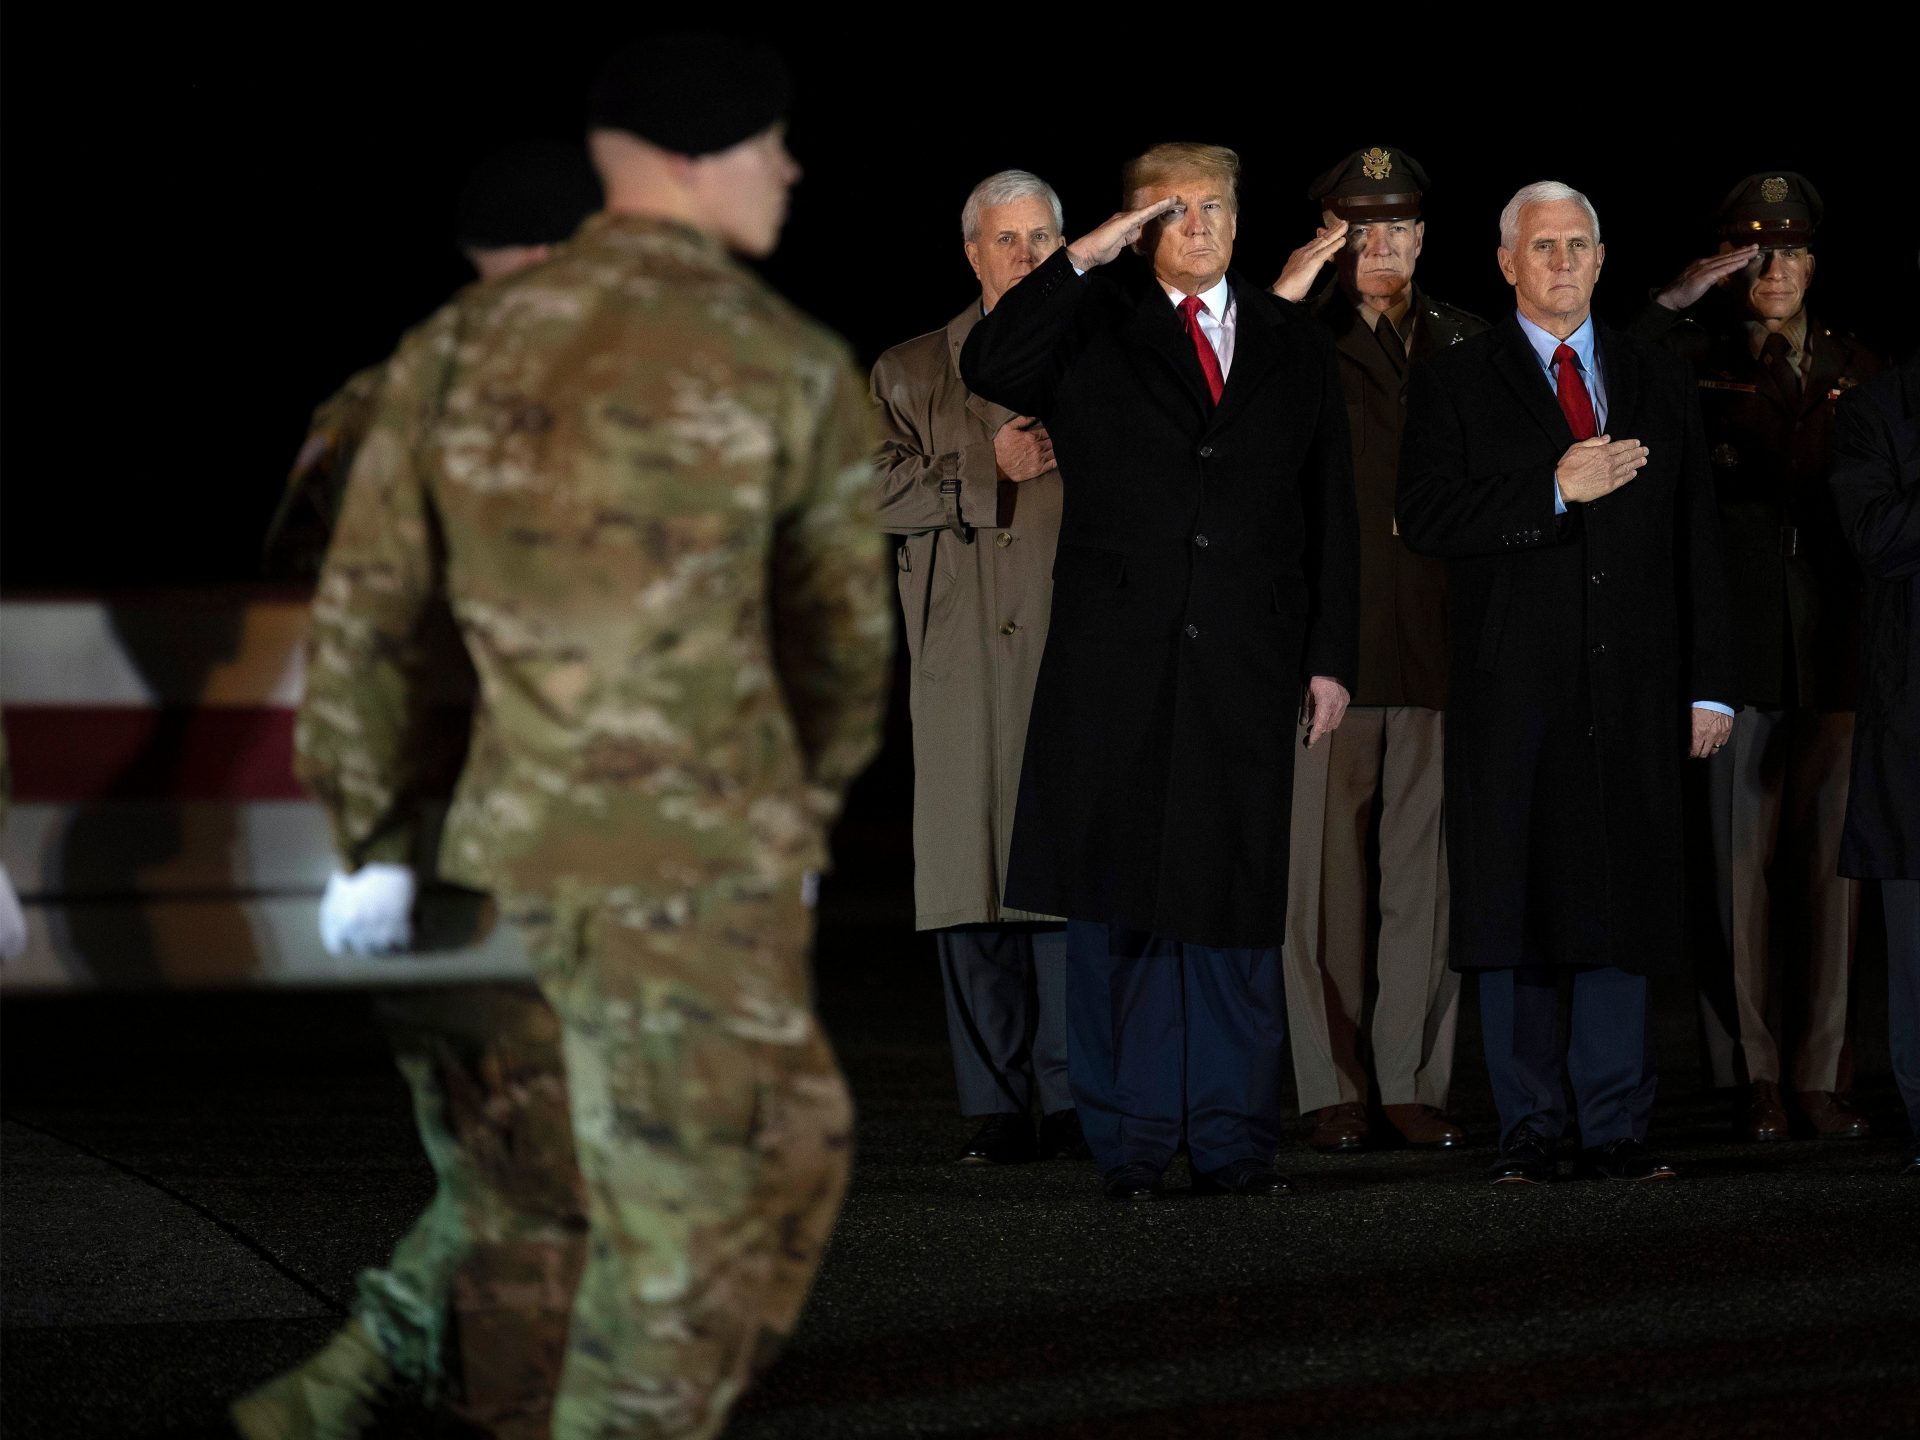 President Trump and Vice President Pence observe the dignified transfer of two U.S. soldiers, killed in Afghanistan, at Dover Air Force Base.